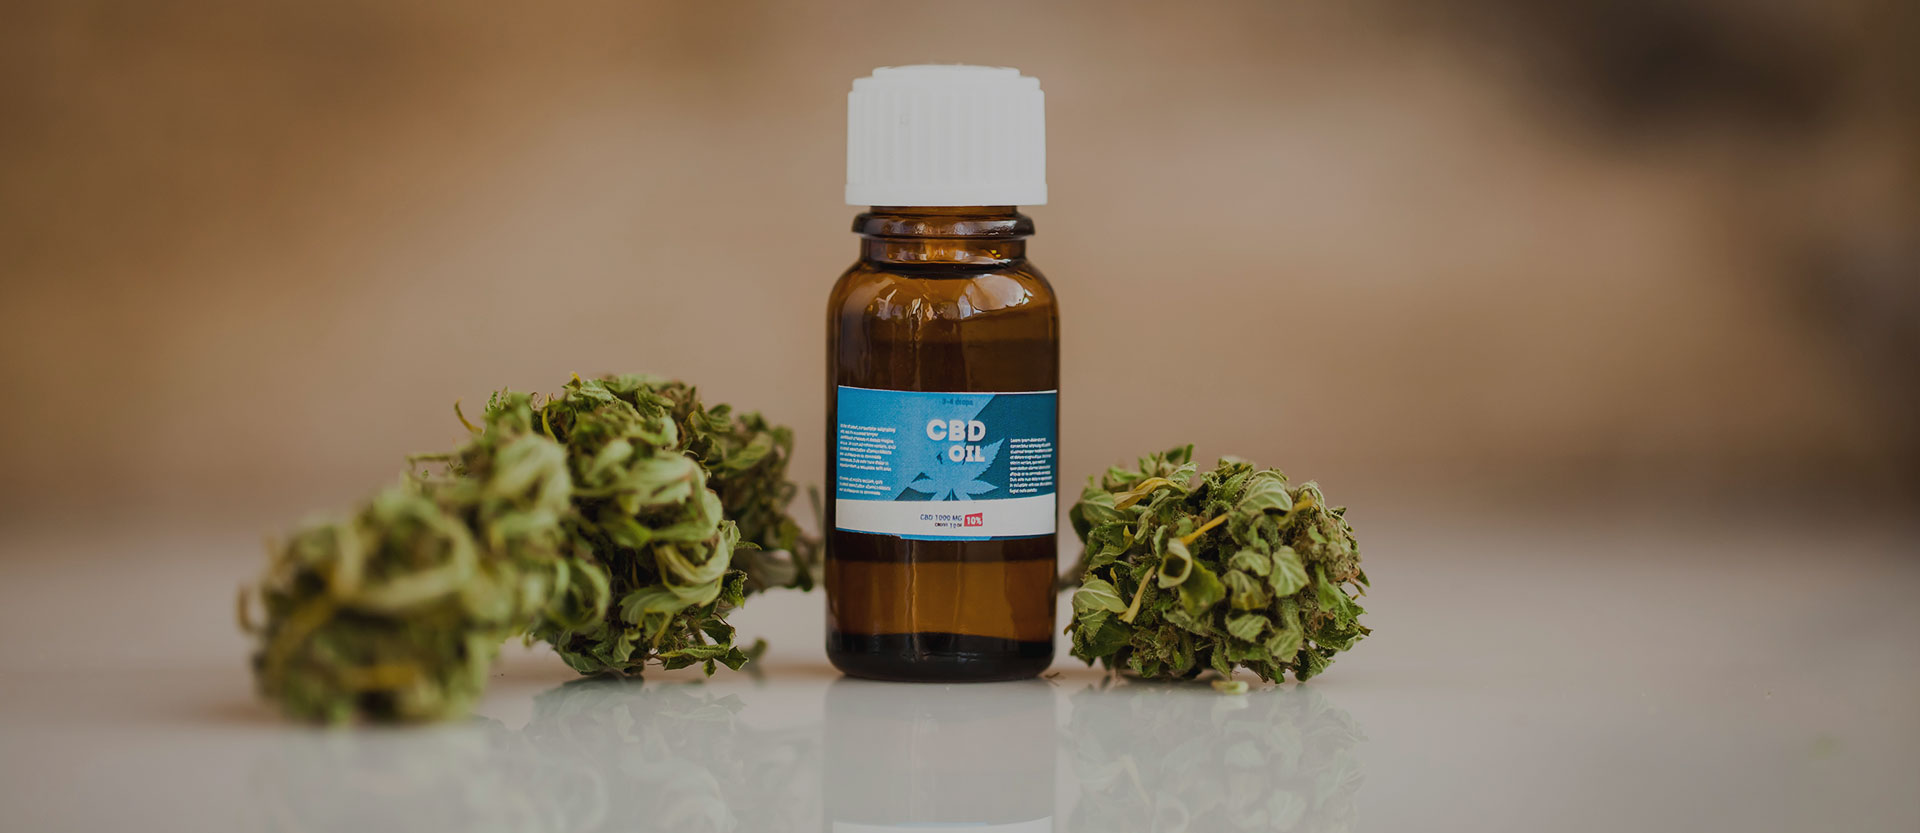 One Step Forward, Two Steps Back – A Plea to Health Canada To Improve the Regulatory Regime for CBD Products